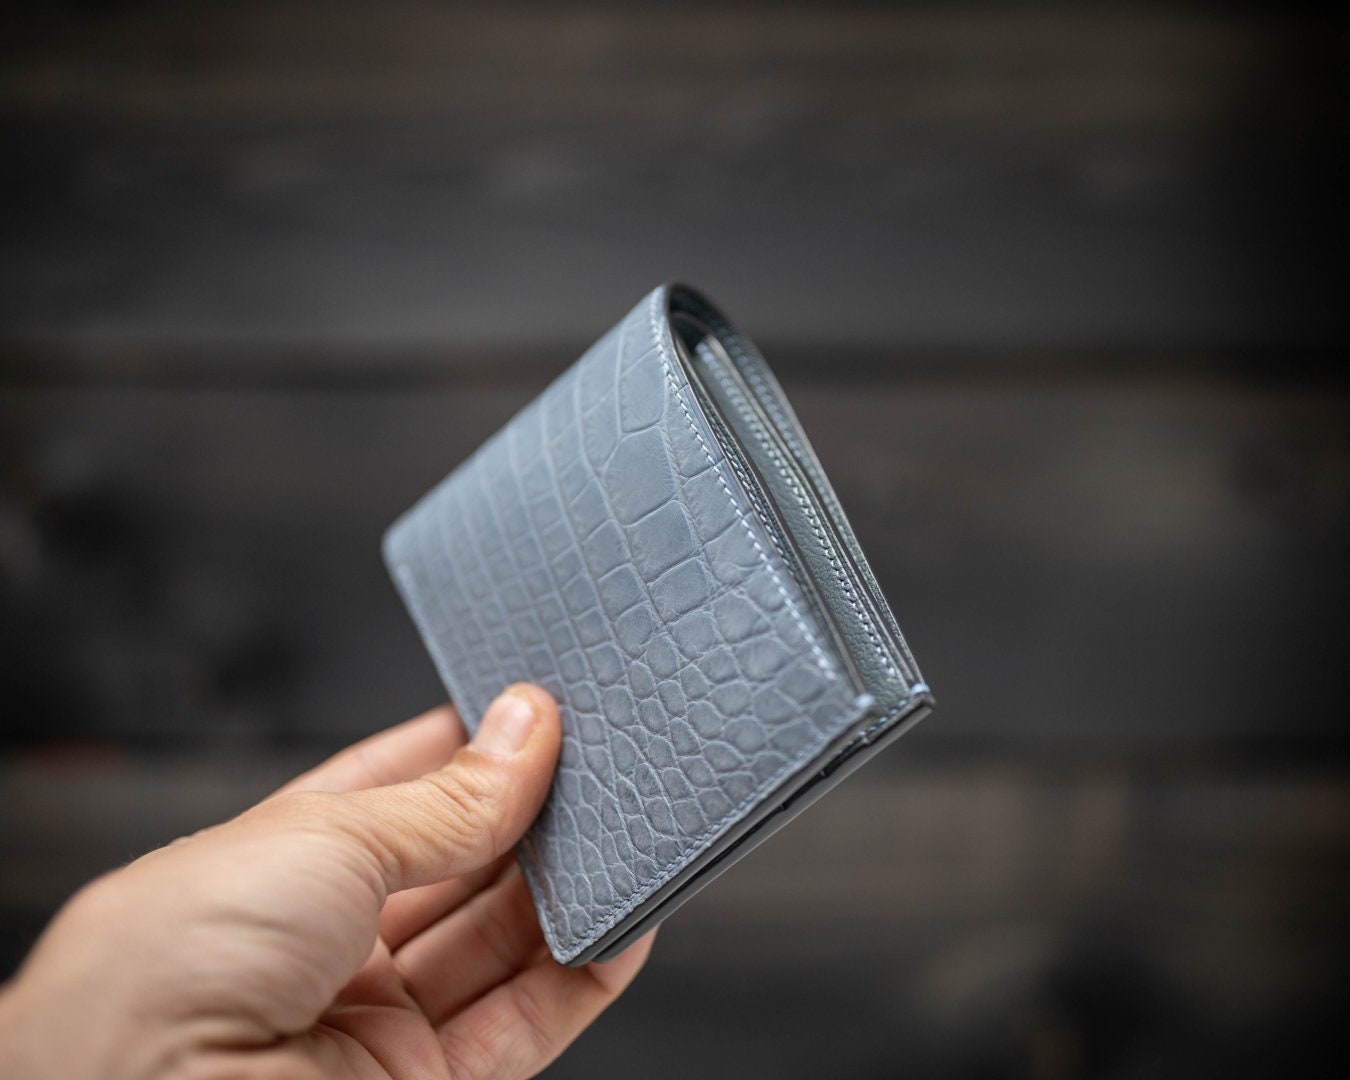 Compact Bifold Wallet in Classic Alligator — Abas